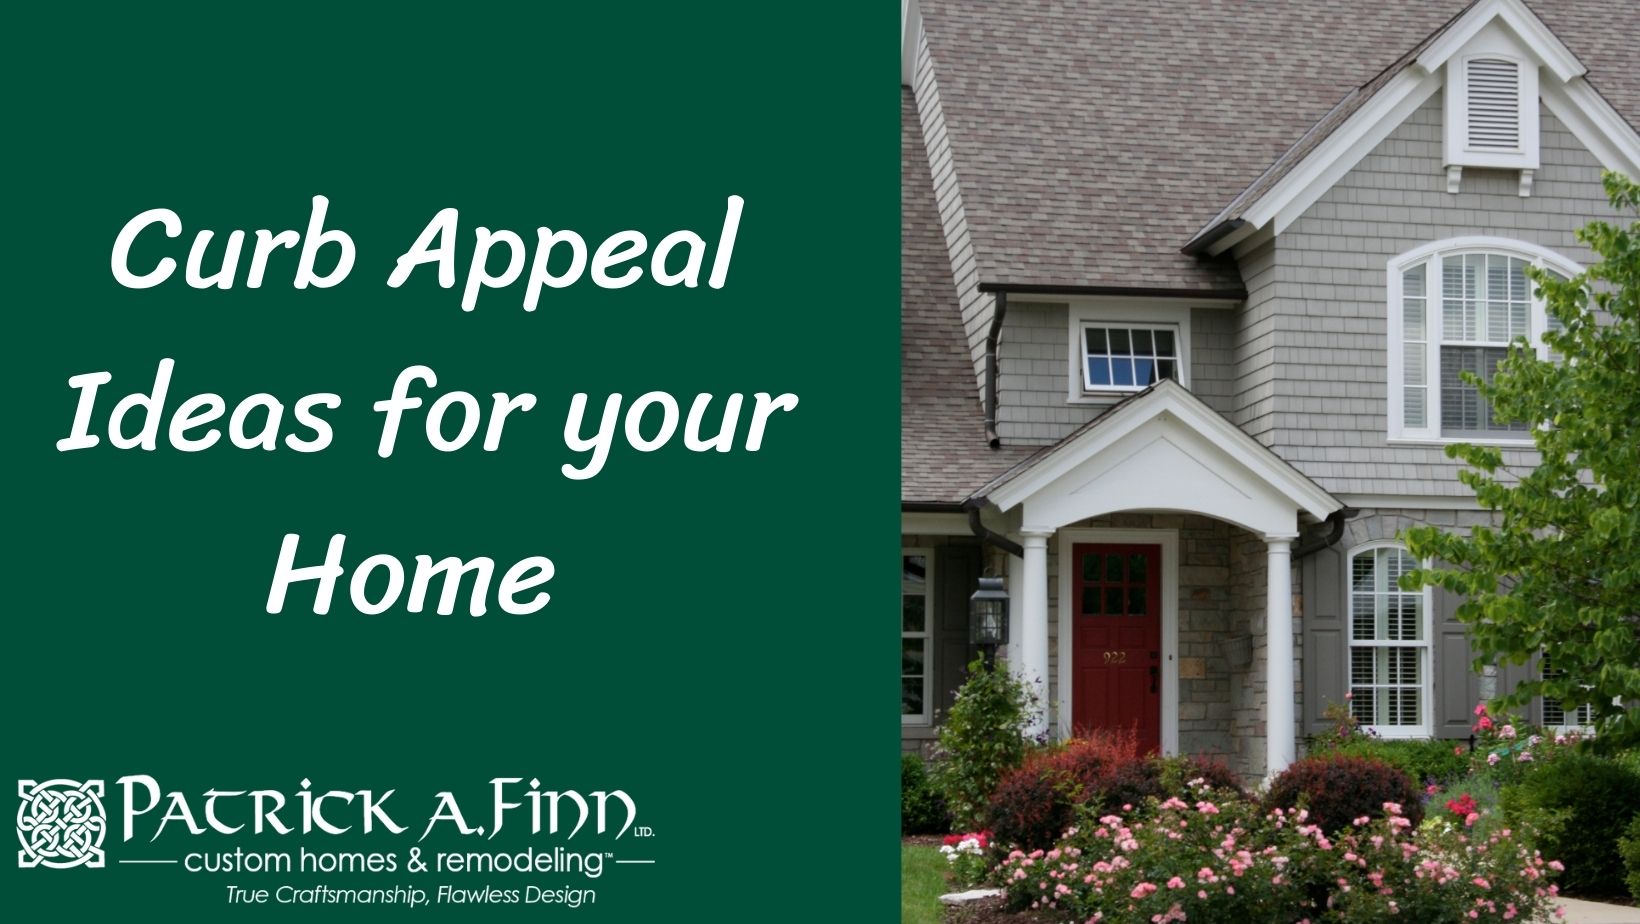 Curb Appeal Ideas for Your Home